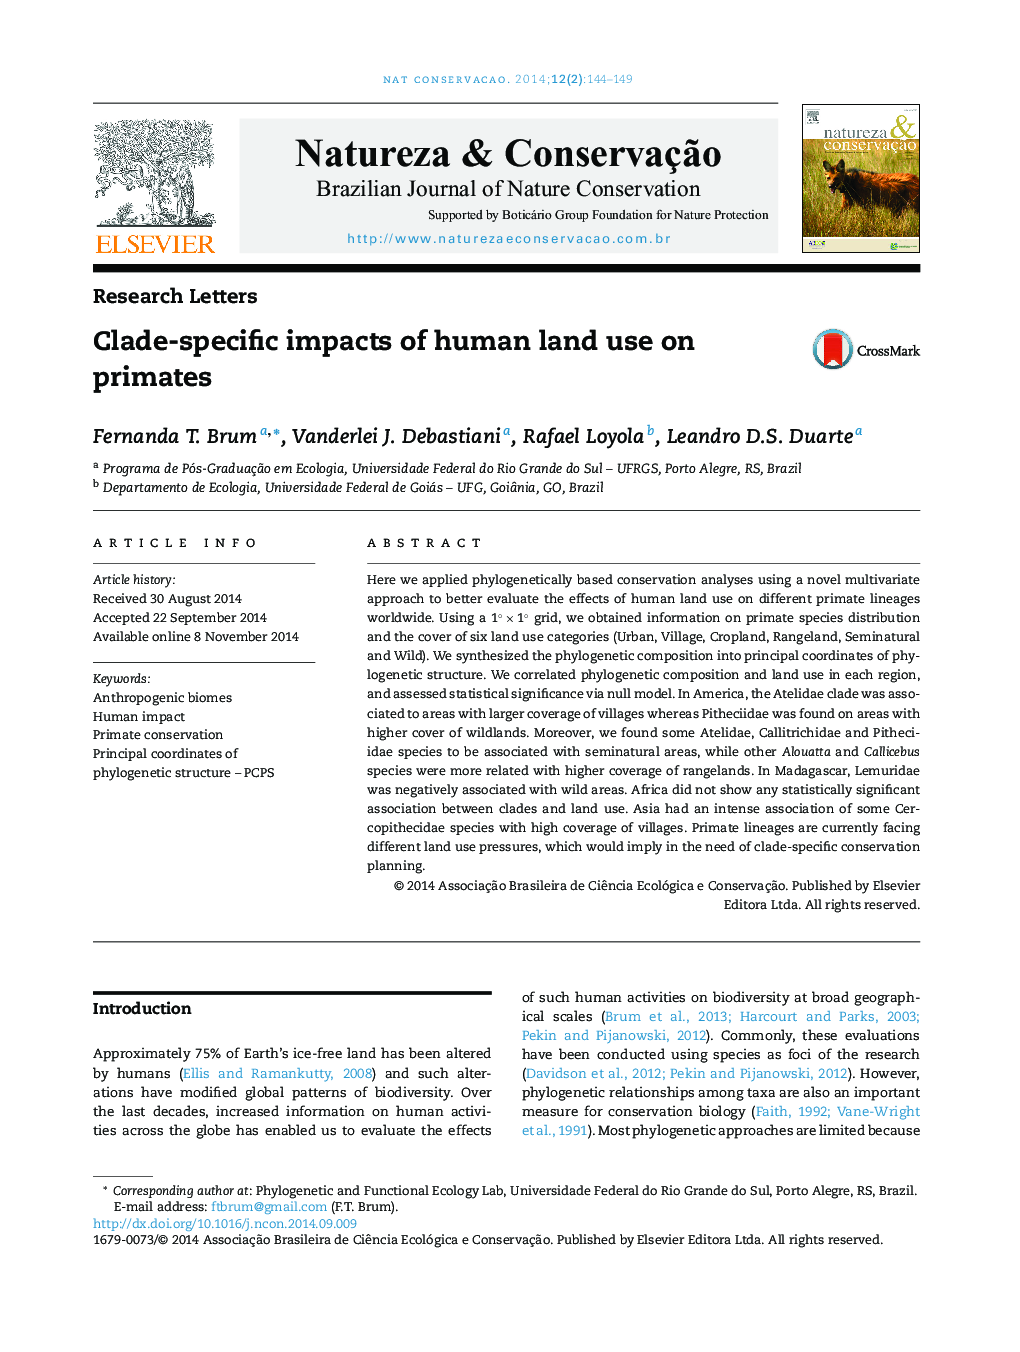 Clade-specific impacts of human land use on primates